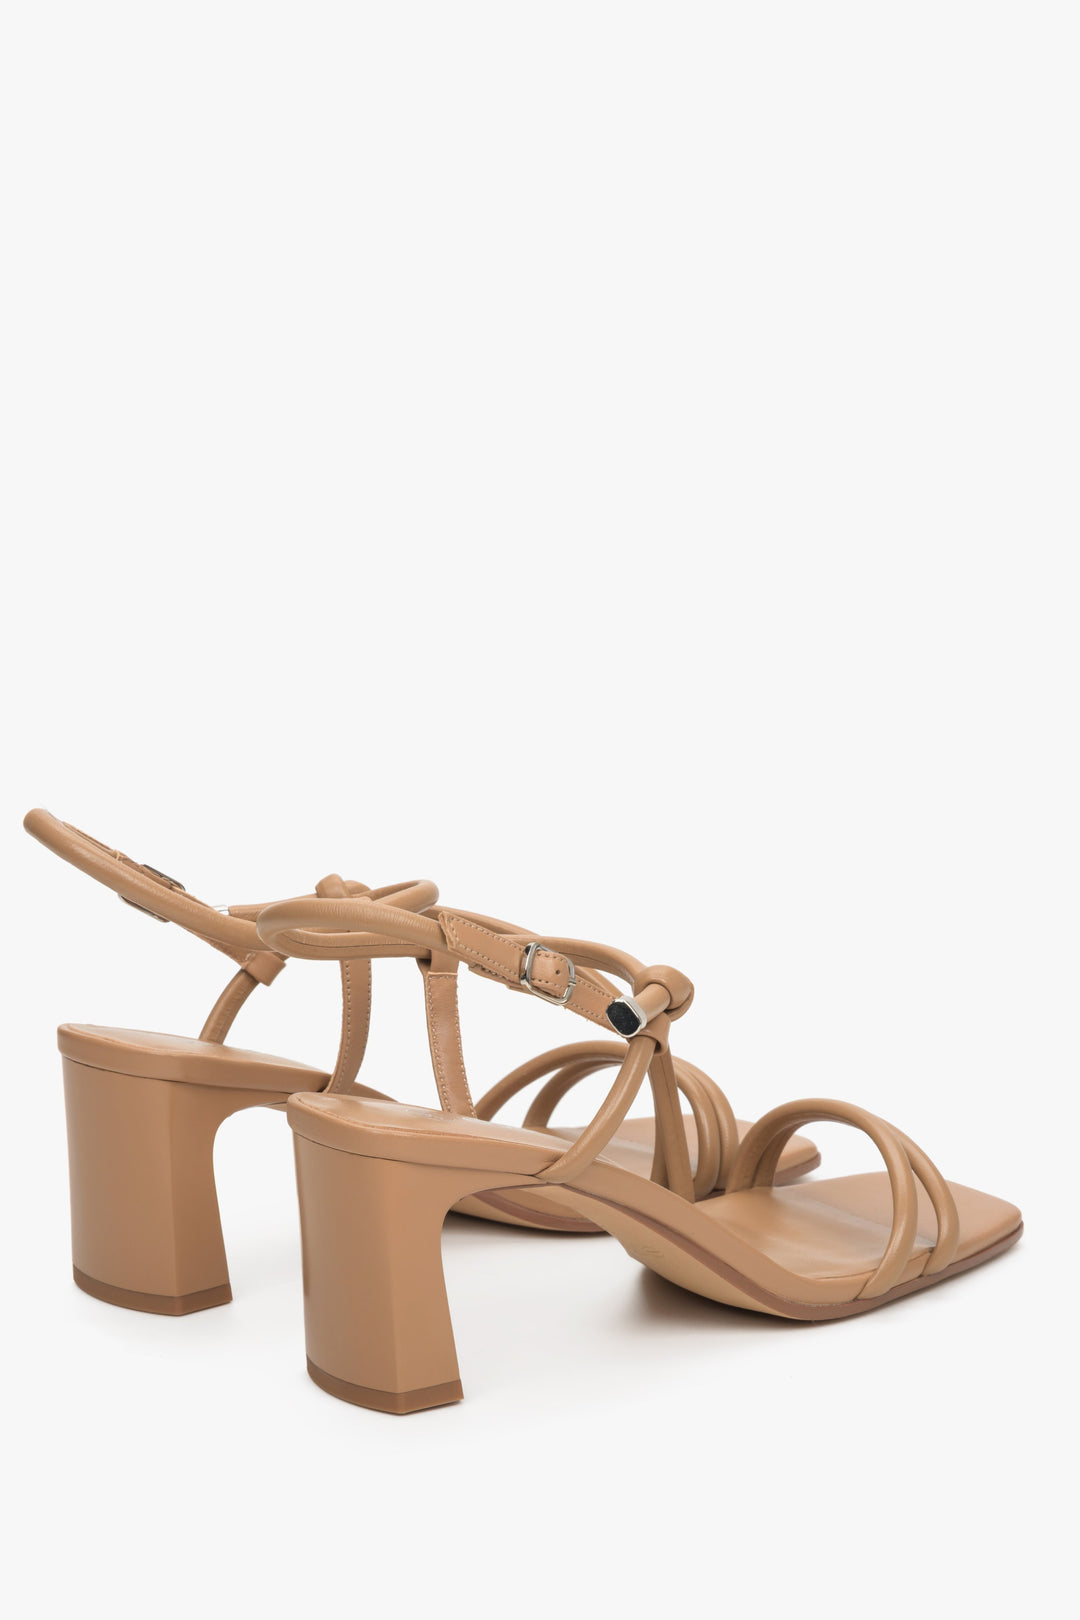 Light brown leather strappy sandals on a block heel, presentation of the heel and sideline.